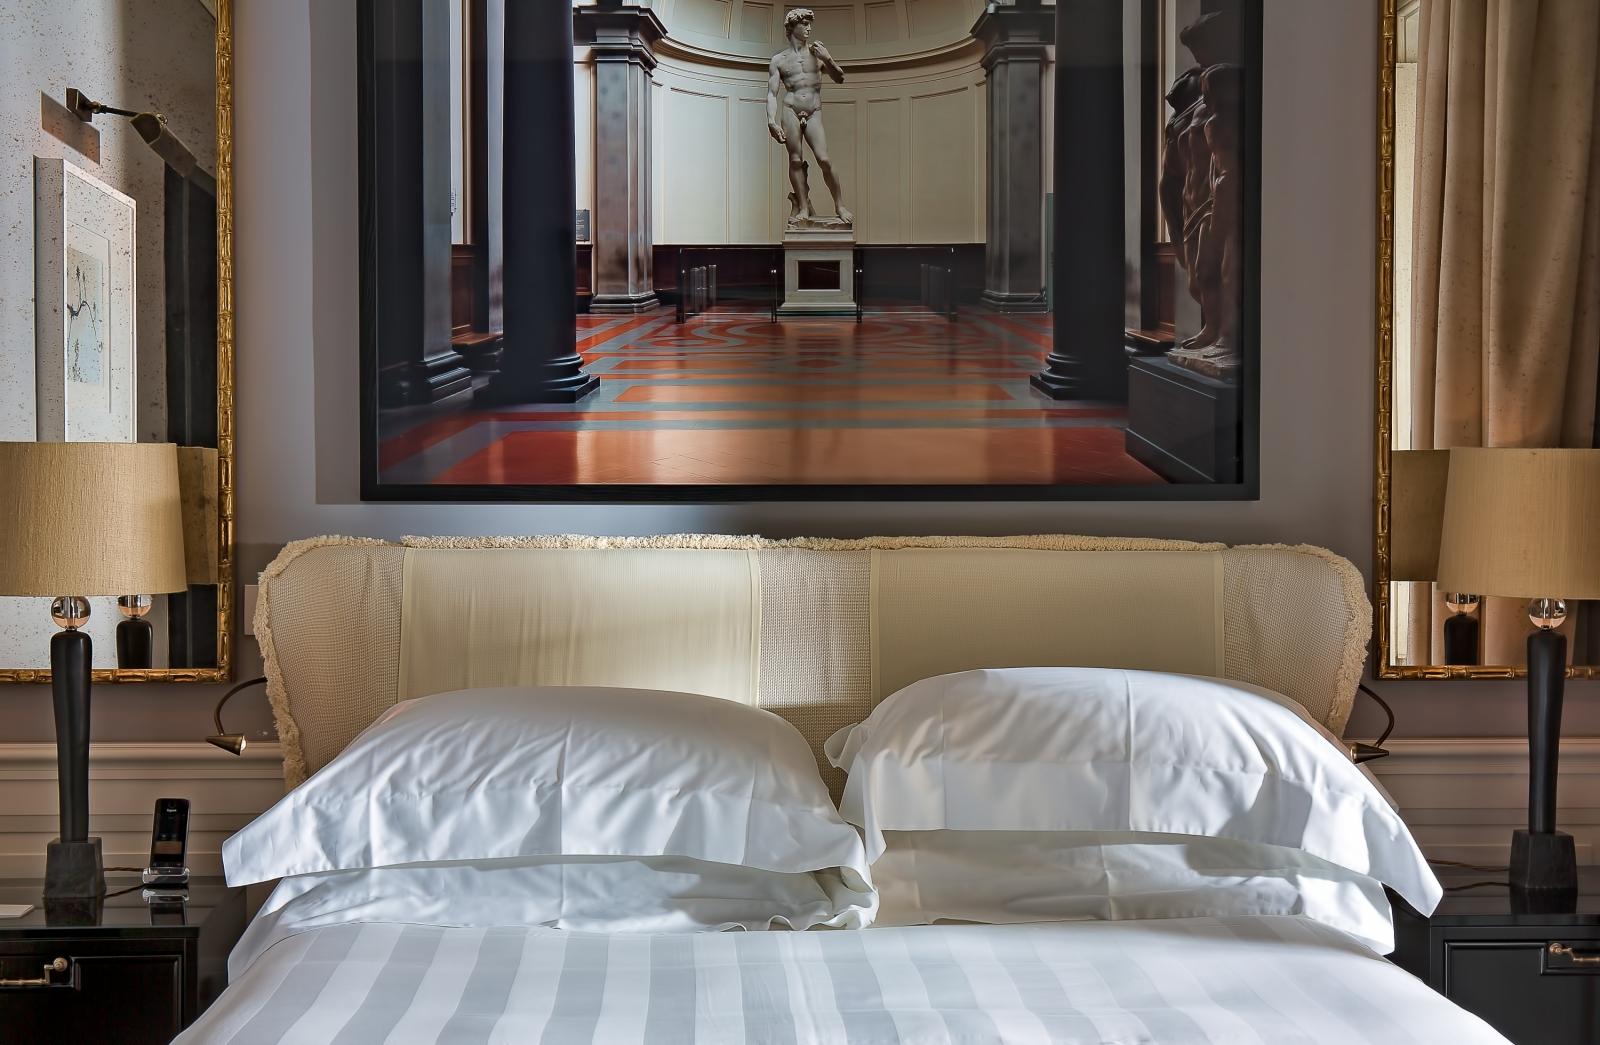 48 x 60 inches
Edition of 5
Chromogenic Print
Framed

Massimo Listri travels his native Italy and the world with his camera, photographing grand interior spaces both iconic and unexpected. His large-scale color prints invite viewers into the